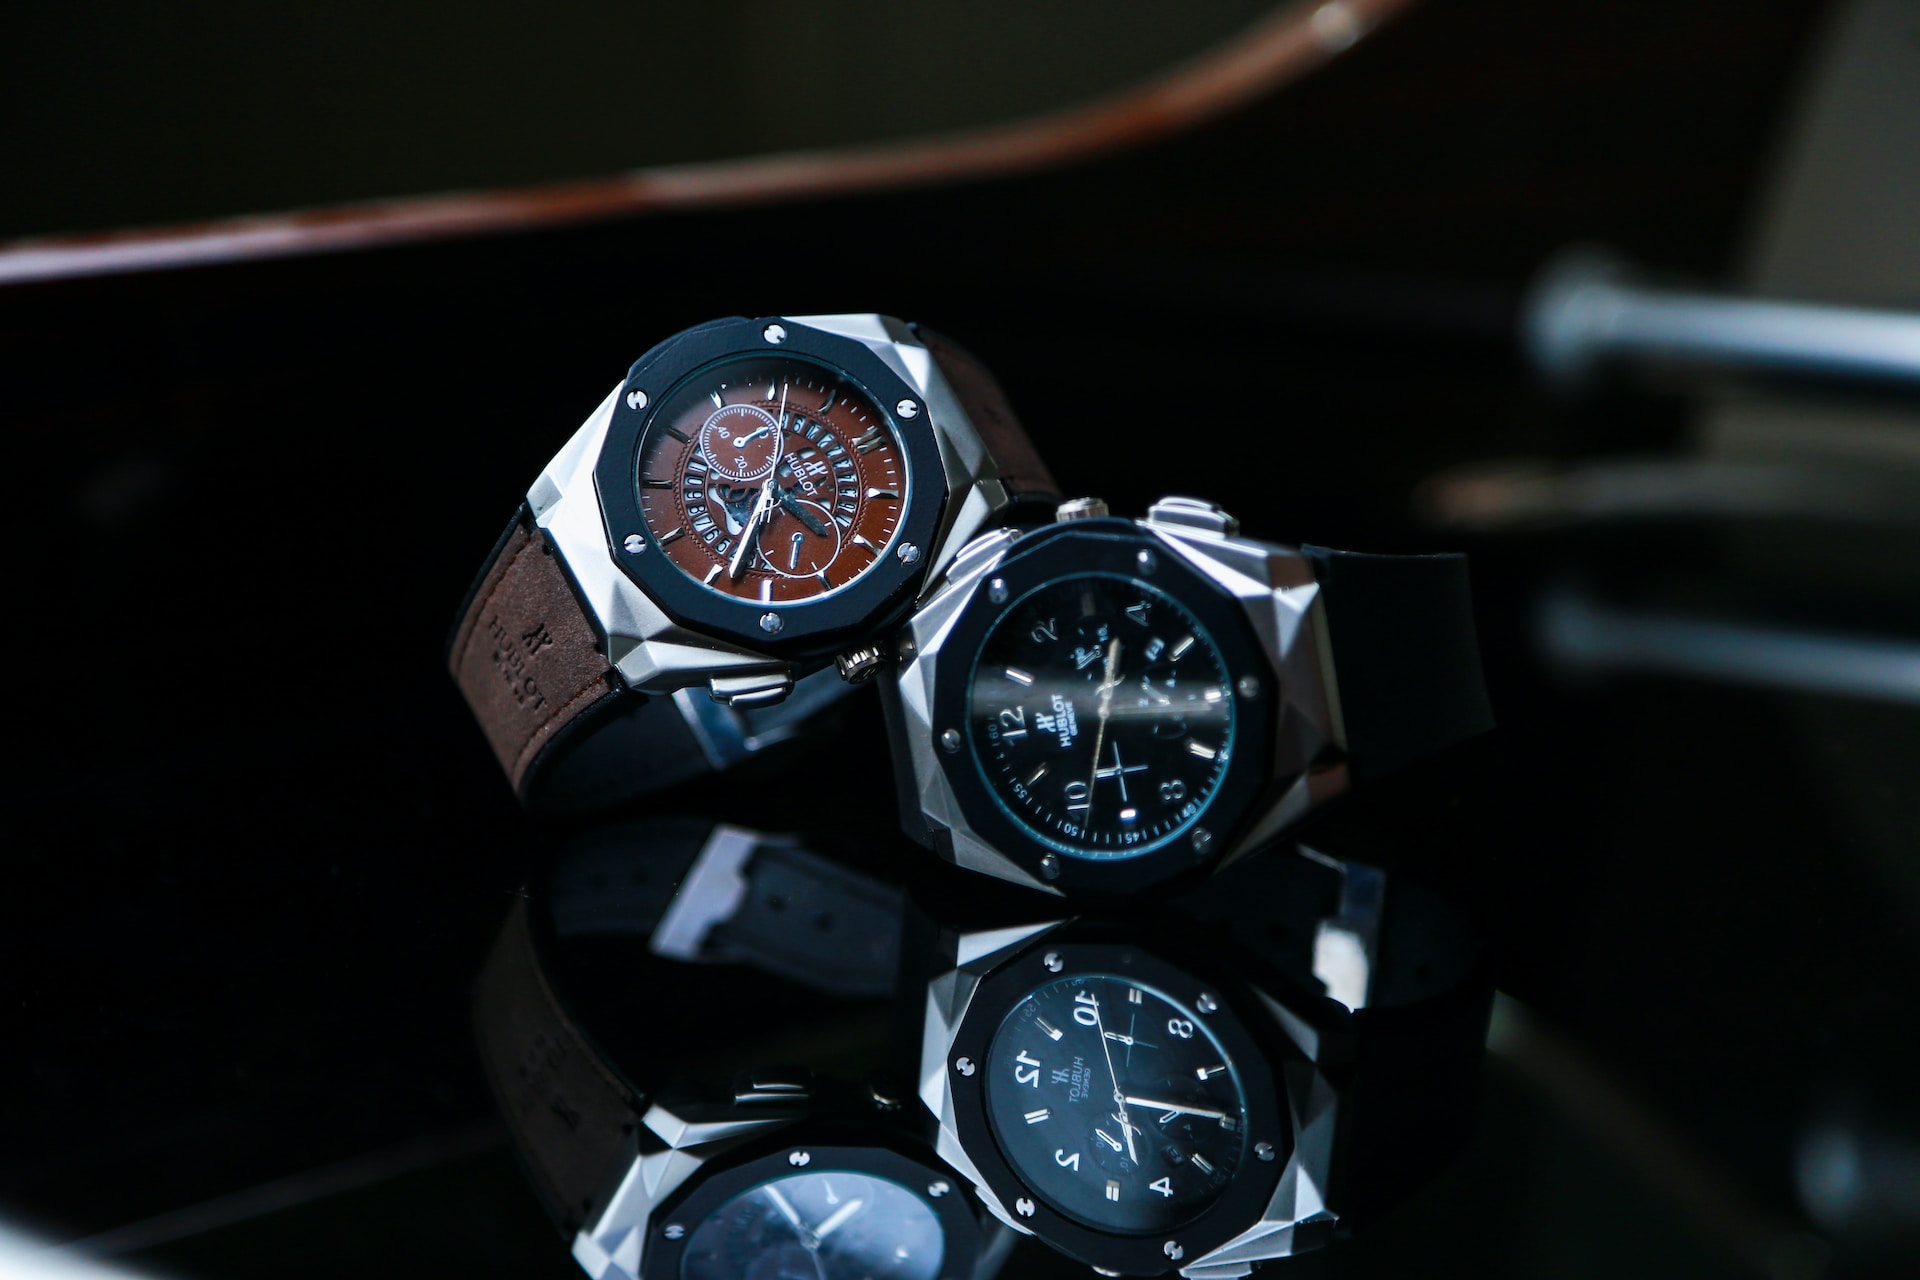 Two sporty watches lay together on a coffee table